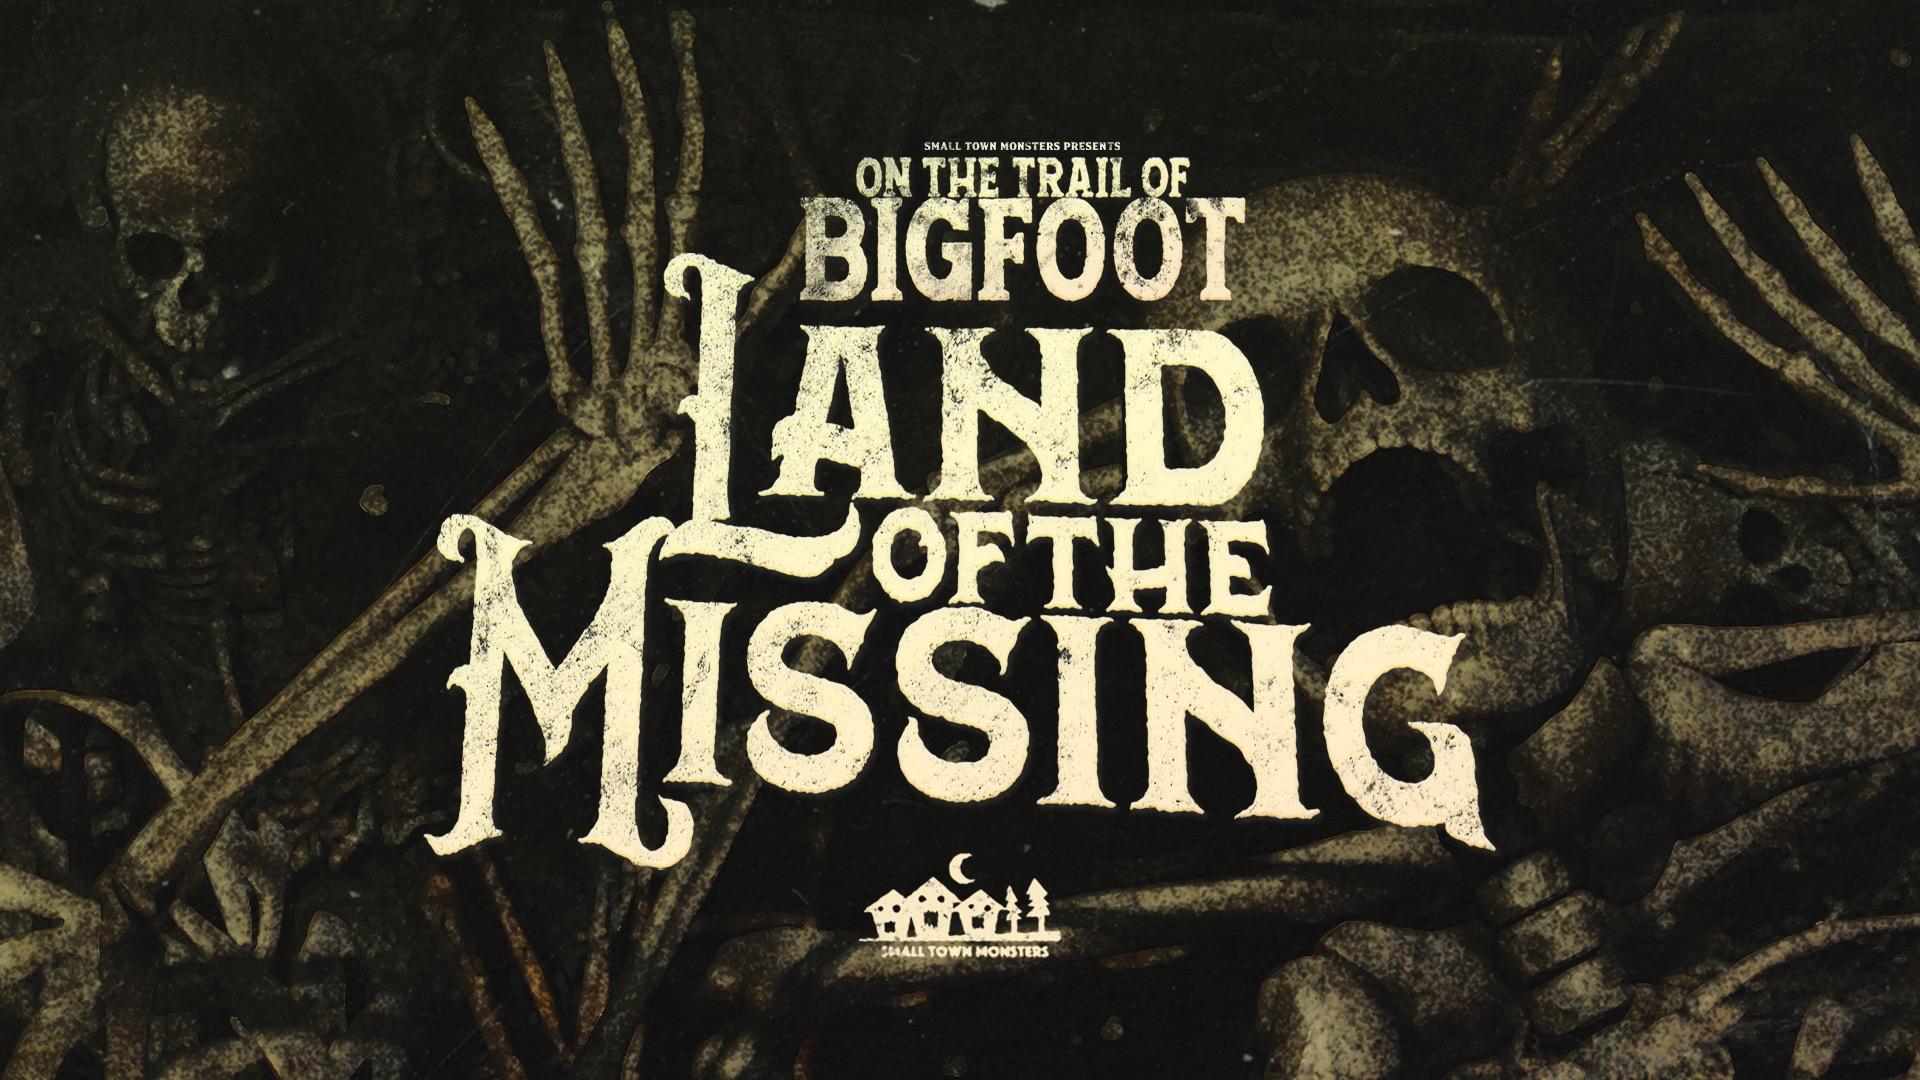 On the Trail of Bigfoot: Land of the Missing Comes to VOD August 22